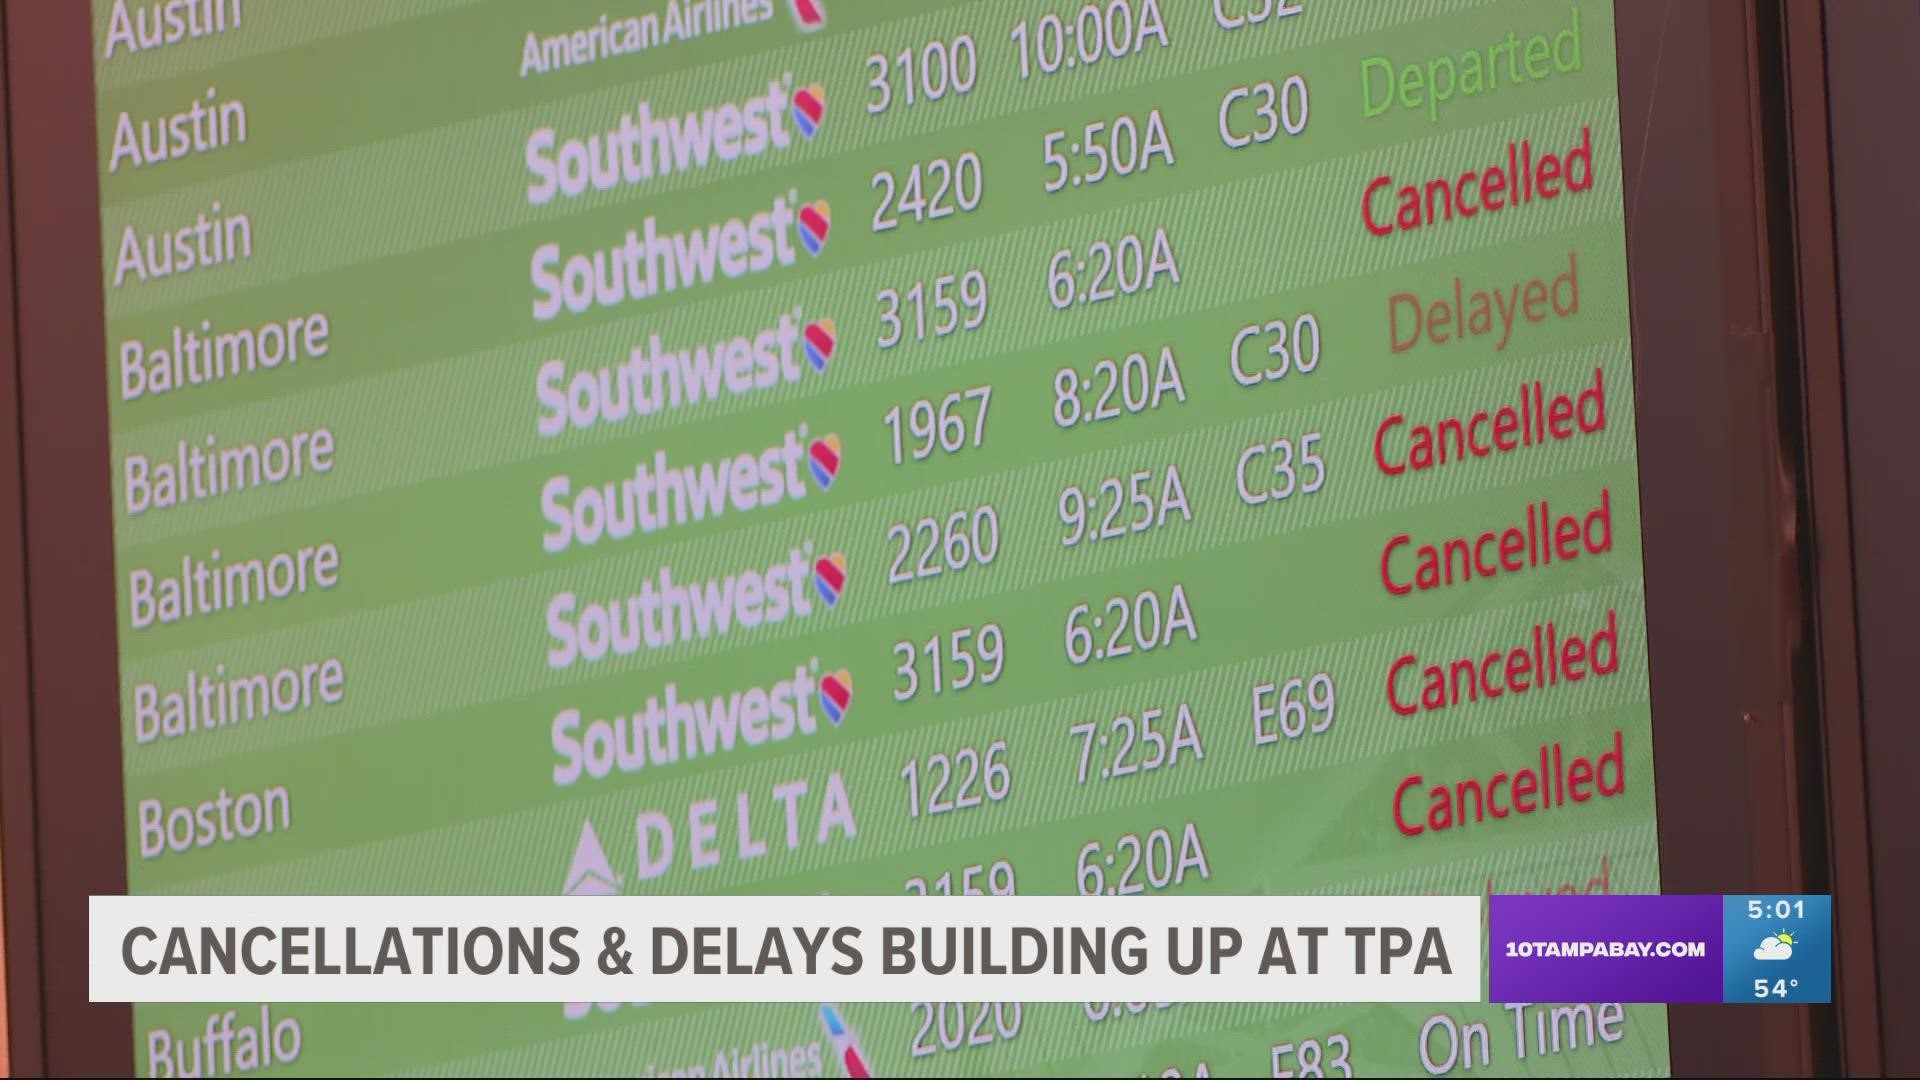 TPA has a total of 203 delays and 115 flight cancellations as of Monday evening, according to FlightAware.